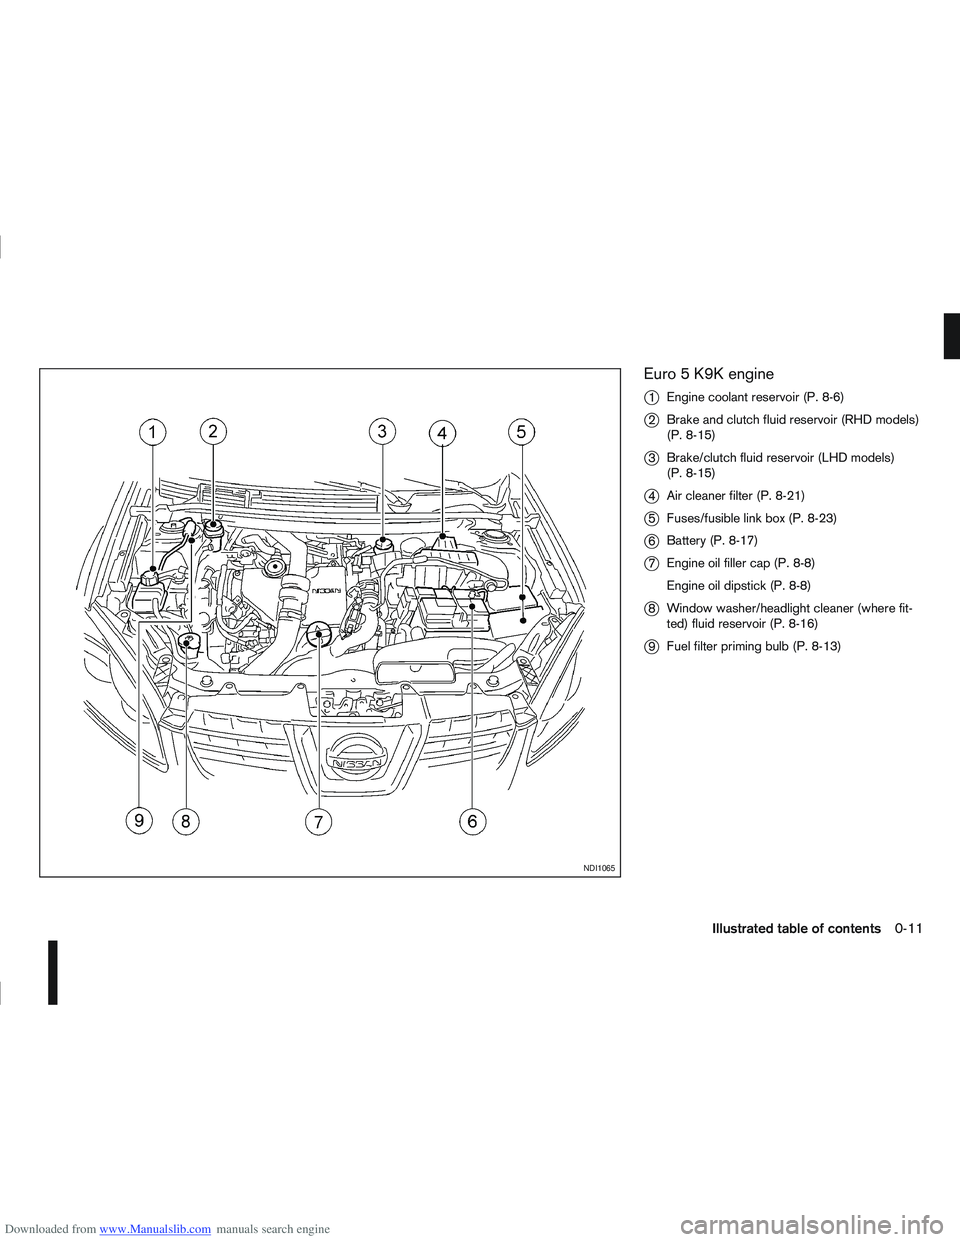 NISSAN QASHQAI 2013  Owners Manual Downloaded from www.Manualslib.com manuals search engine Euro 5 K9K engine
j
1Engine coolant reservoir (P. 8-6)
j2Brake and clutch fluid reservoir (RHD models)
(P. 8-15)
j3Brake/clutch fluid reservoir